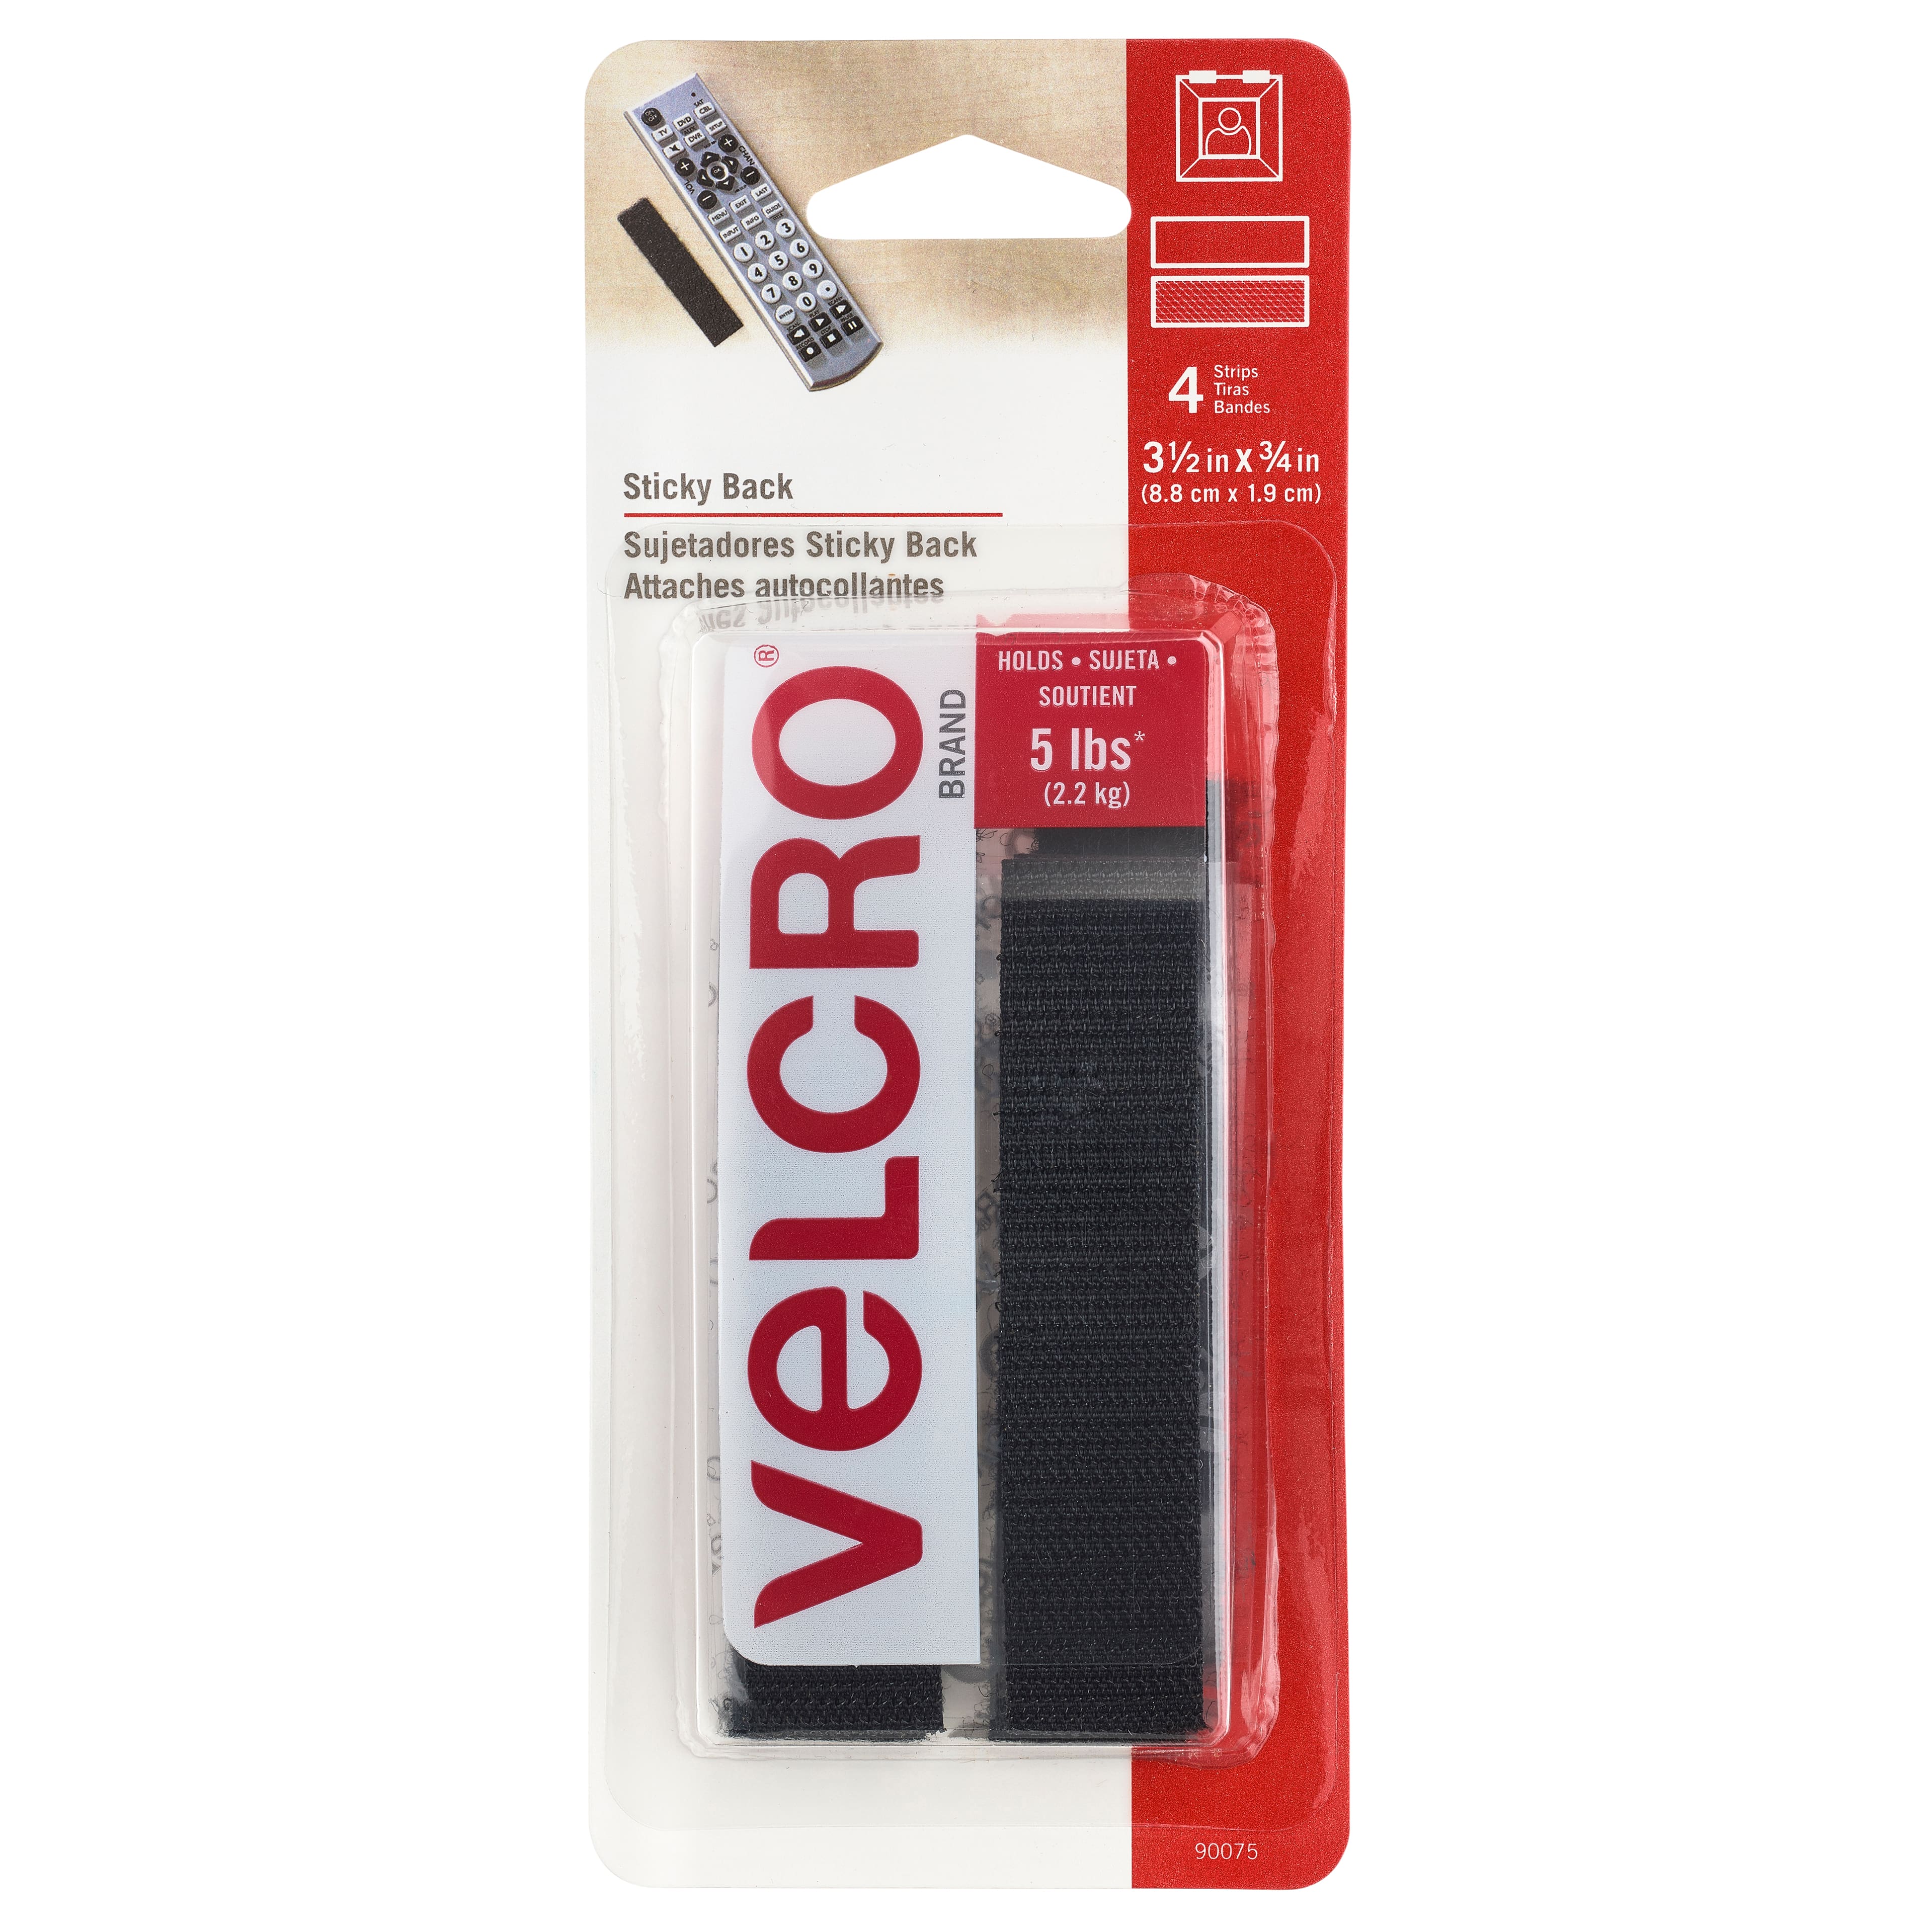 VELCRO® BRAND SEW ON PATCH KIT, 4 WIDE FOLIAGE GREEN - SMALL PACKS -  VELCRO® BRAND TAPES - DRAPERY TAPES